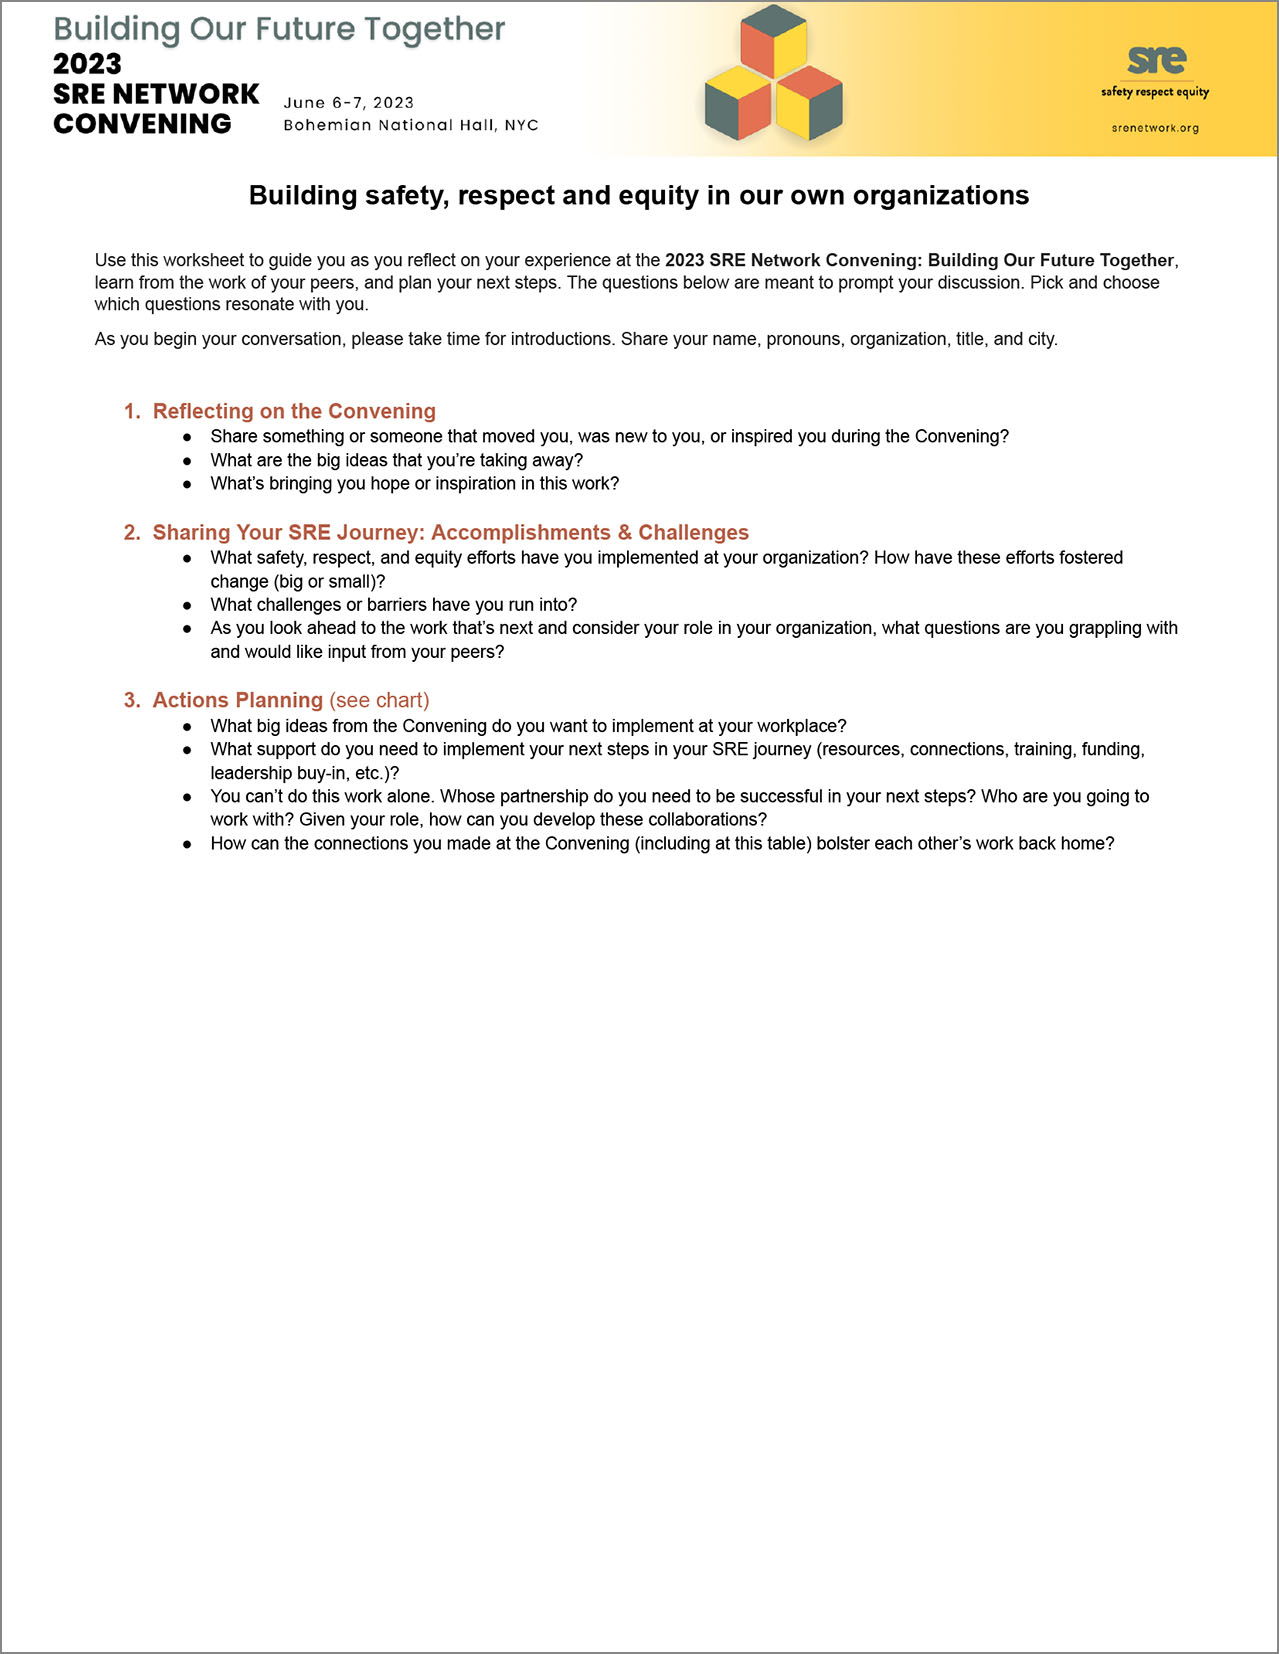 Worksheet: Building safety, respect and equity in our own organi